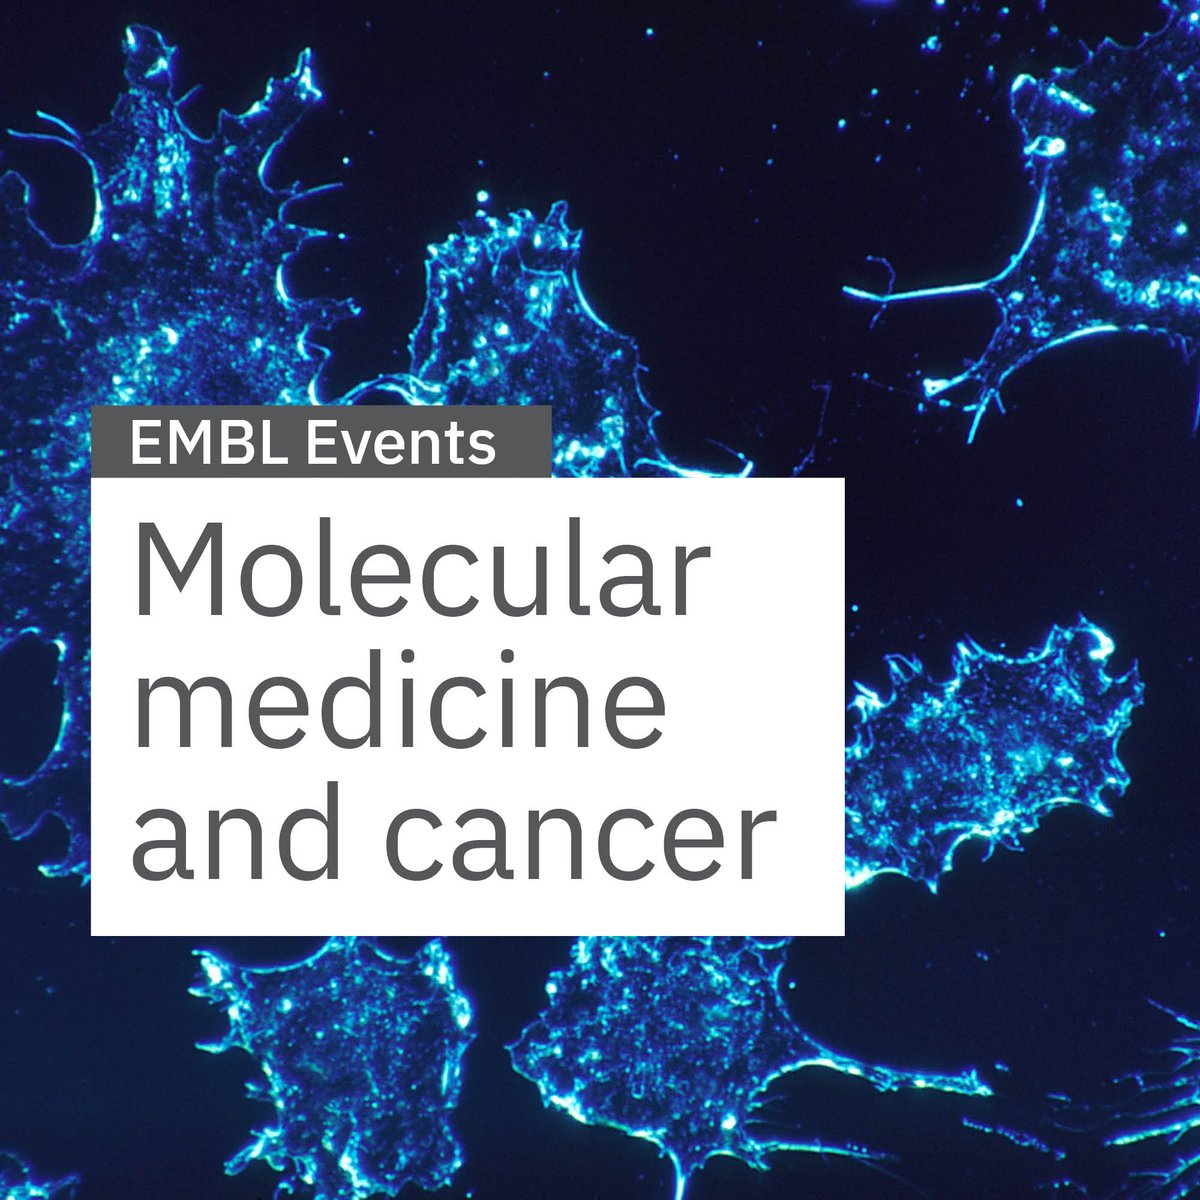 Are you signed up for our 'Molecular medicine and cancer' updates?⚕️🧬👀
Here's our latest newsletter listing upcoming meetings & training opportunities in the field. Join us in Heidelberg or virtually! 📅✍🏽

🔍 mailchi.mp/embl.org/molec…

#EMBL50 #molecularmedicine #cancerresearch